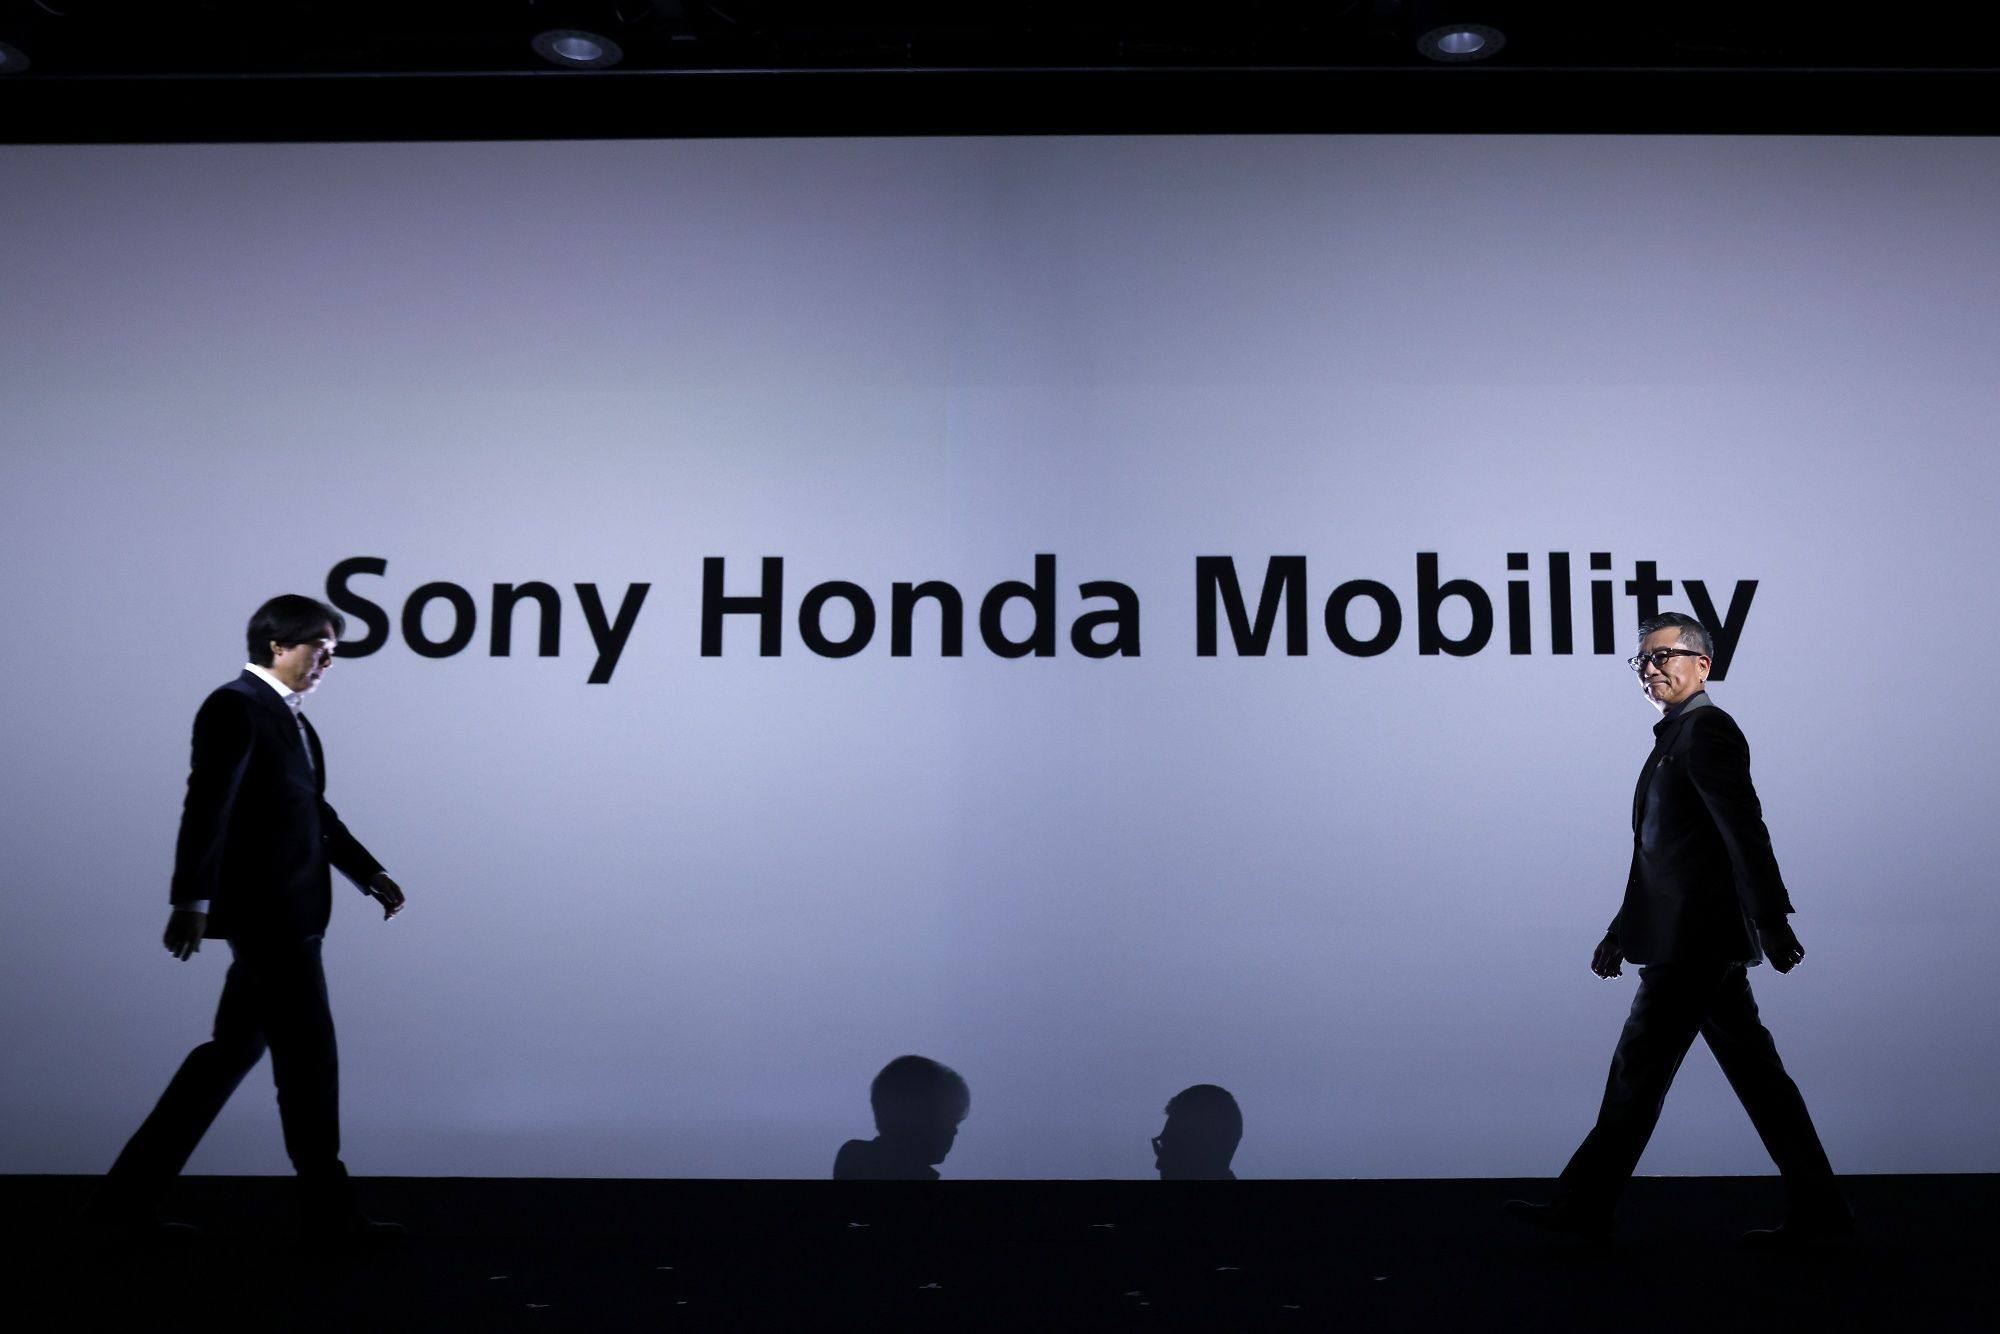 Yasuhide Mizuno, chairman and chief executive officer of Sony Honda Mobility (right), and Izumi Kawanishi, president and chief operating officer, at a news conference in Tokyo, on October 13, 2022. Photo: Bloomberg